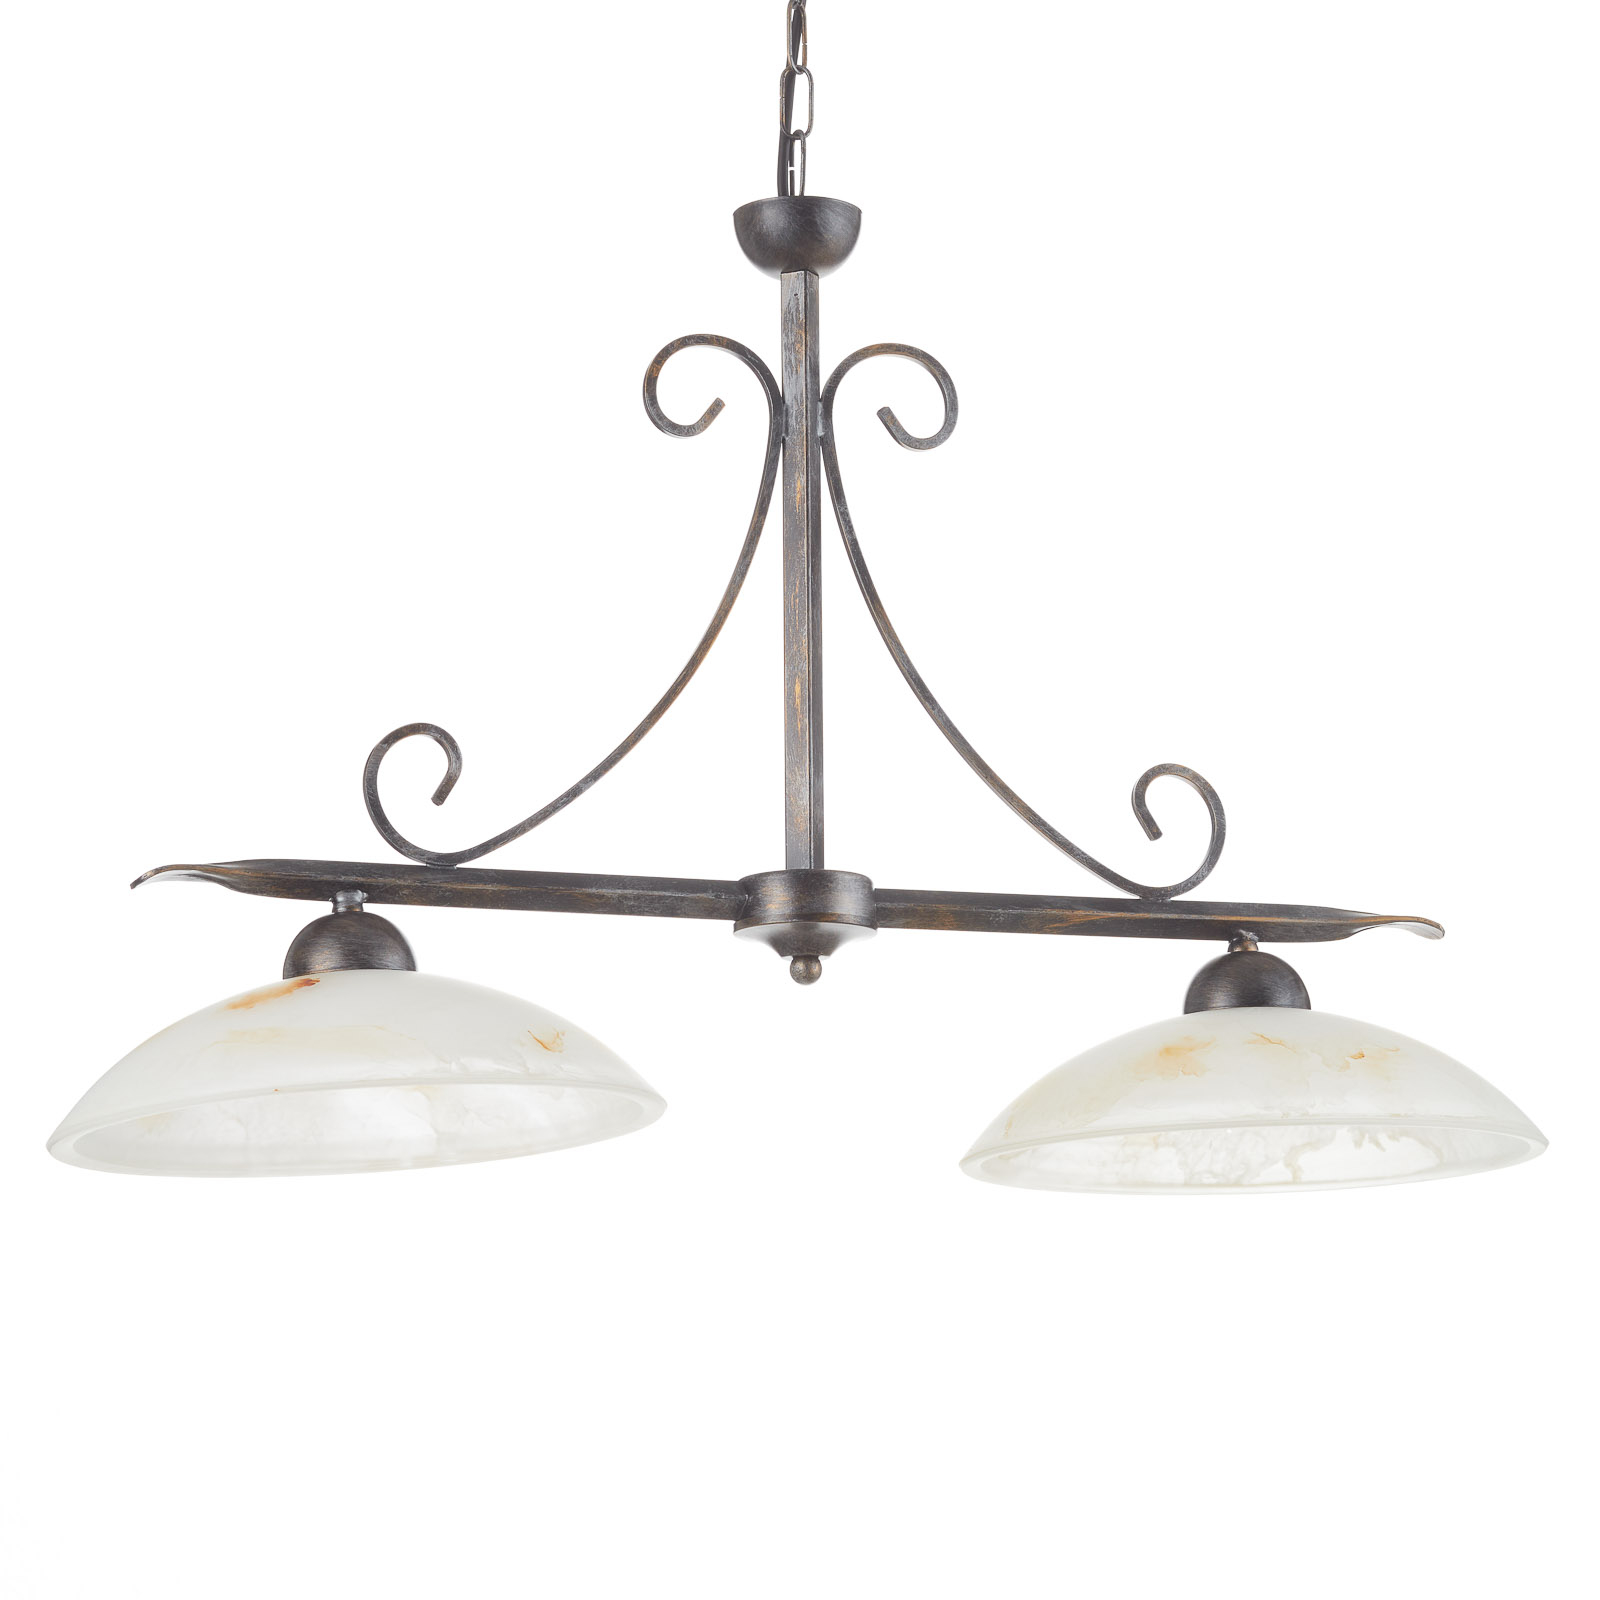 Country house style hanging light Dana, 2-bulb